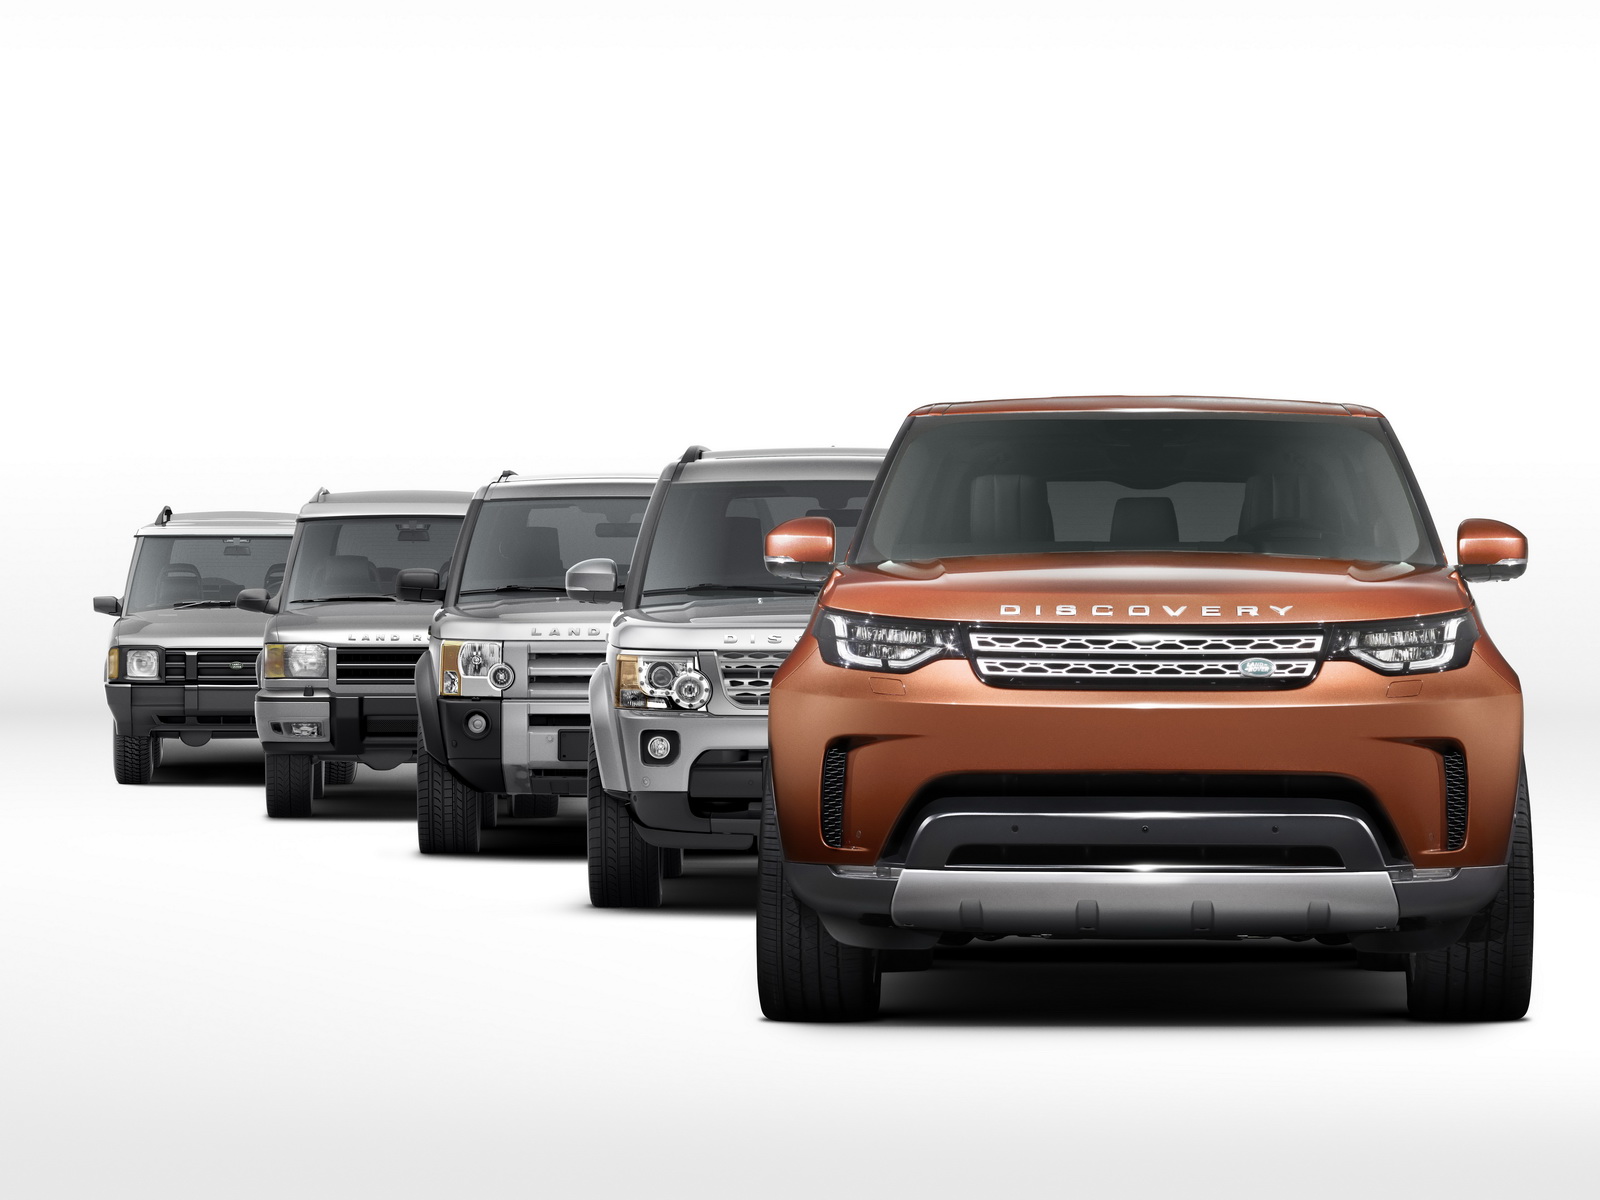 All new 2017 Land Rover Discovery throughout Generations